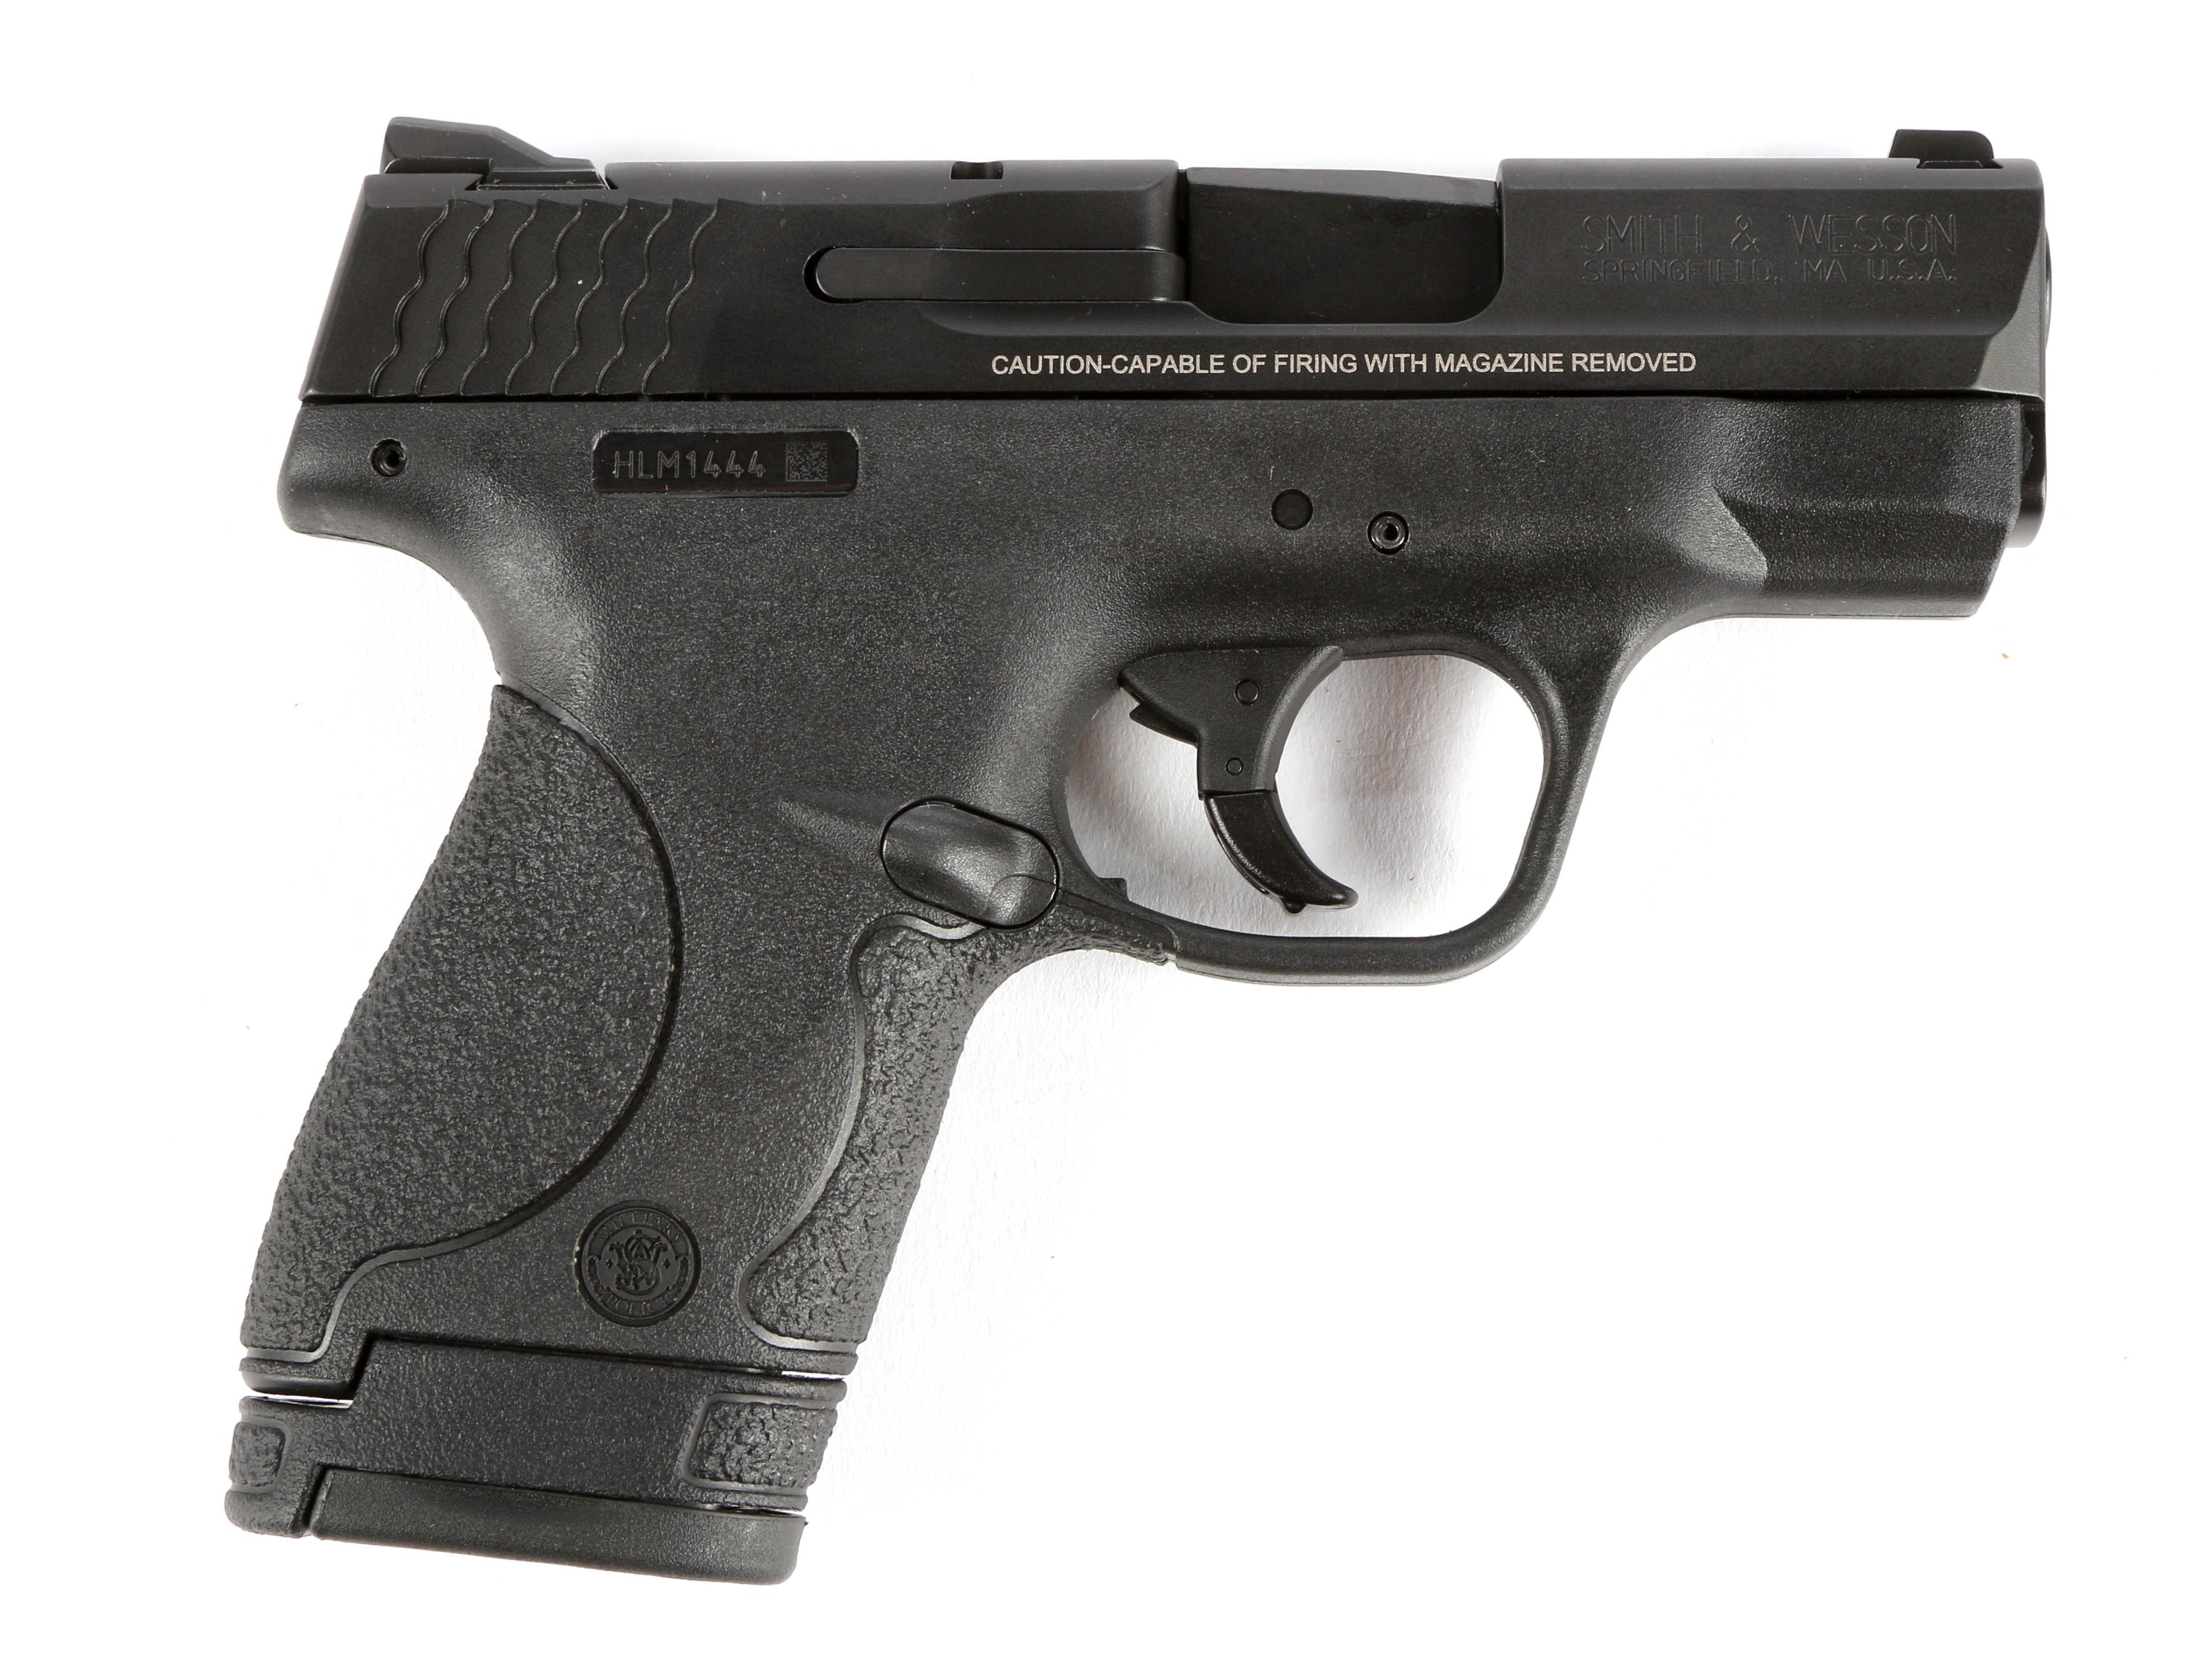 Smith & Wesson M&P Shield 9 in 9mm